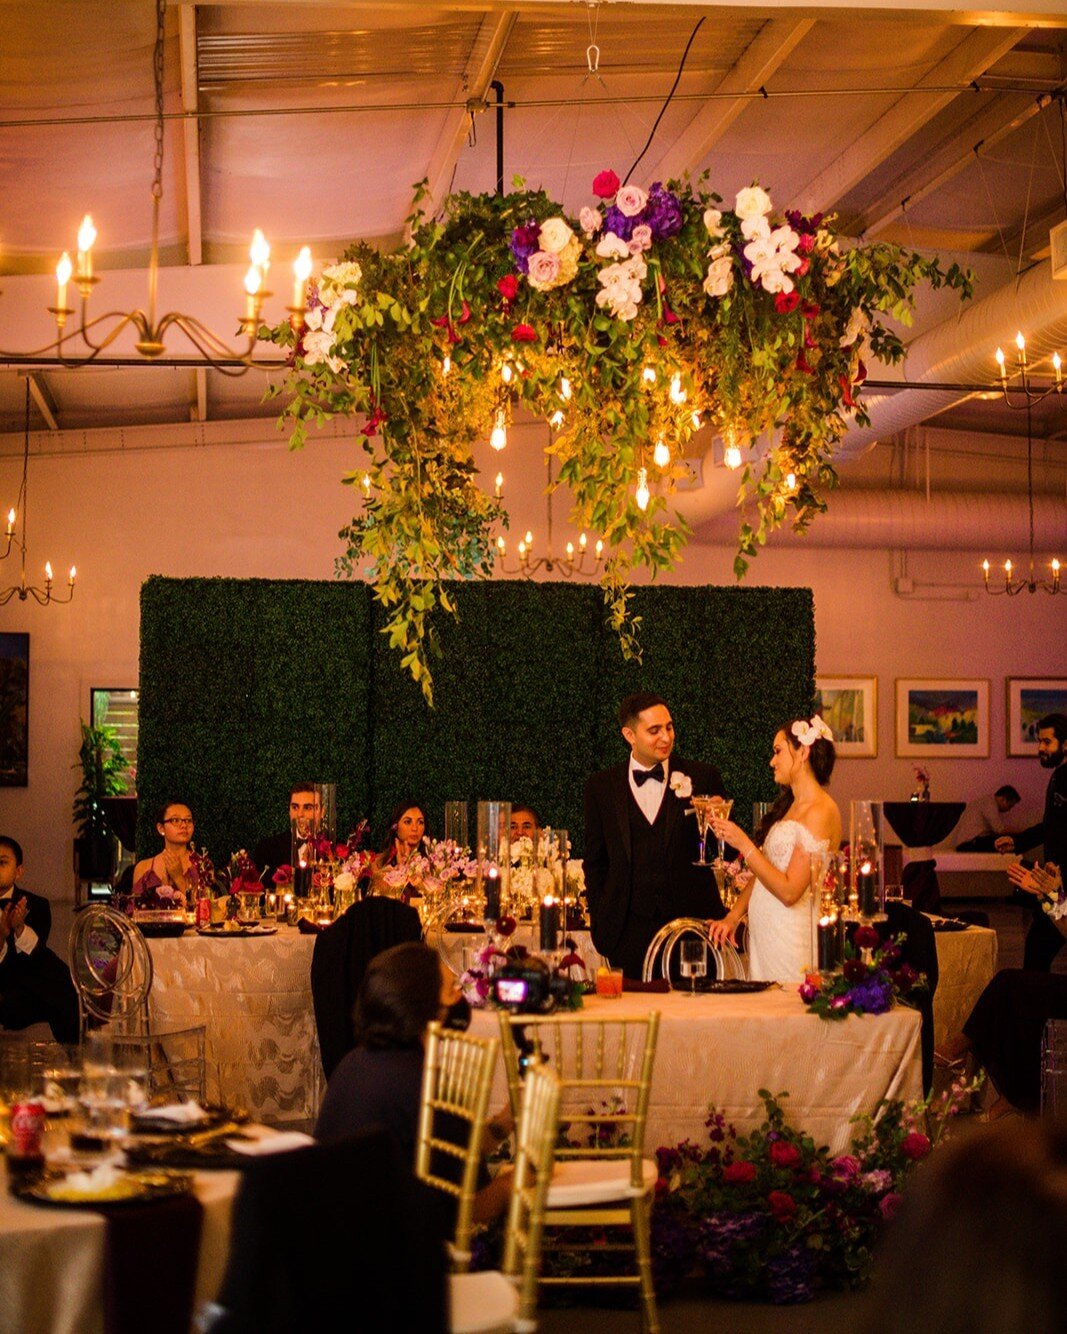 Our greenery hoop light fixture is the perfect place to center your sweetheart table under. Adding flowers is just another way to make it even more beautiful!​​​​​​​​​
Photography: @cynthiajviola
Florals: @vintagesoulfloraldesign

#thecollectorsroomc